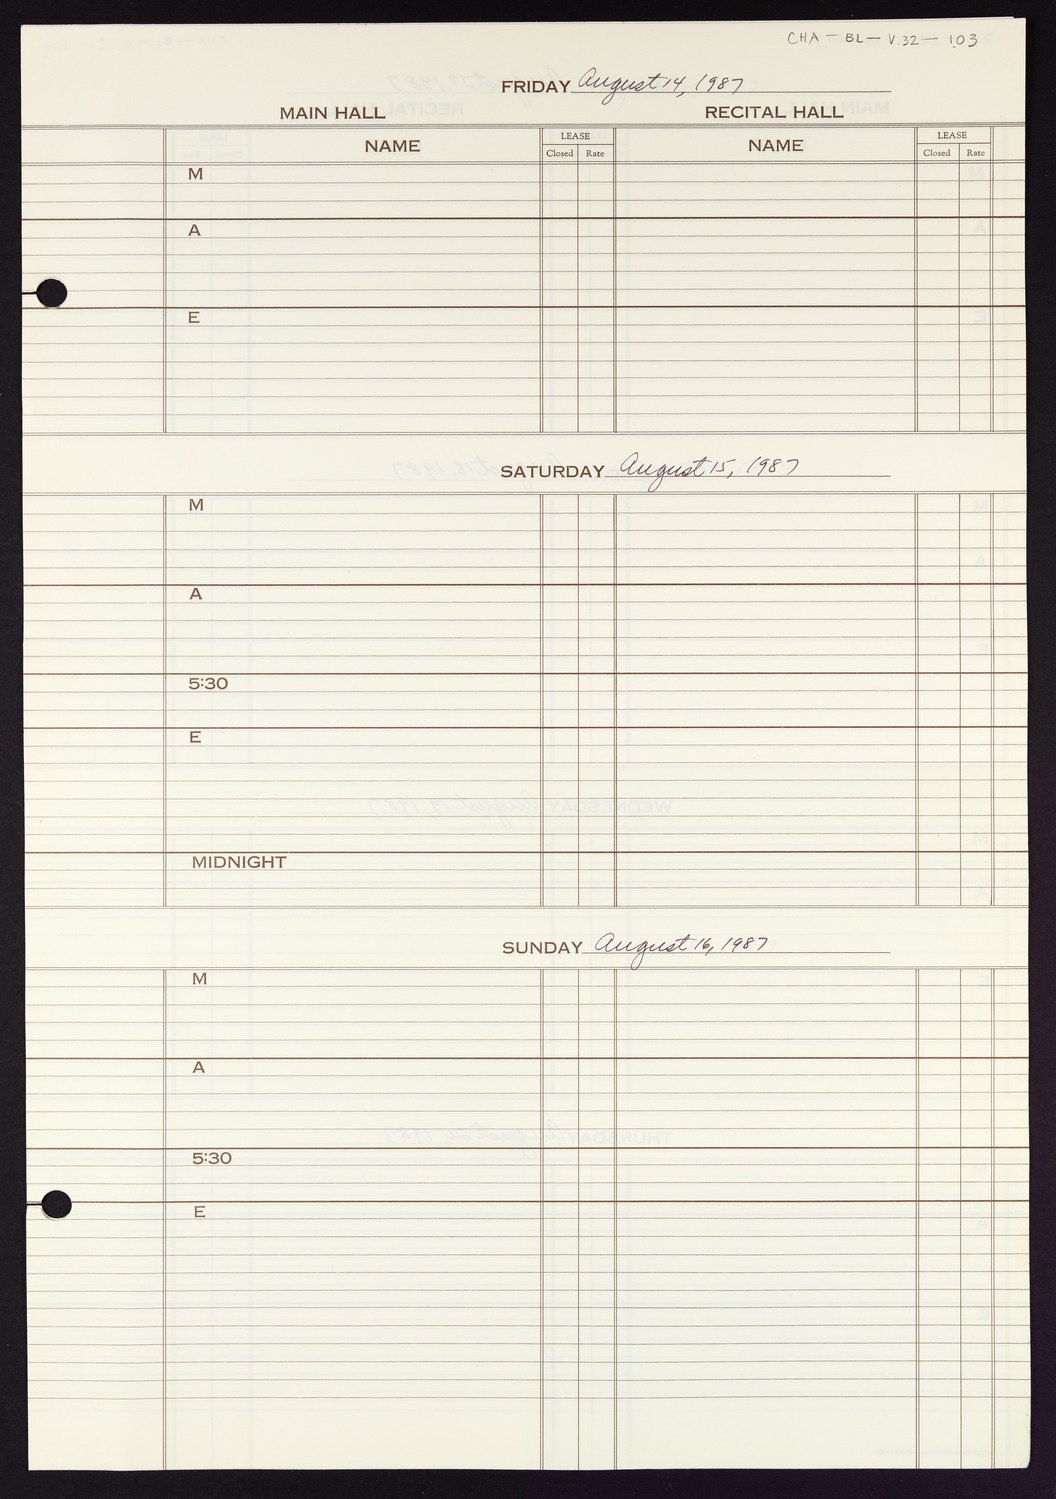 Carnegie Hall Booking Ledger, volume 32, page 103